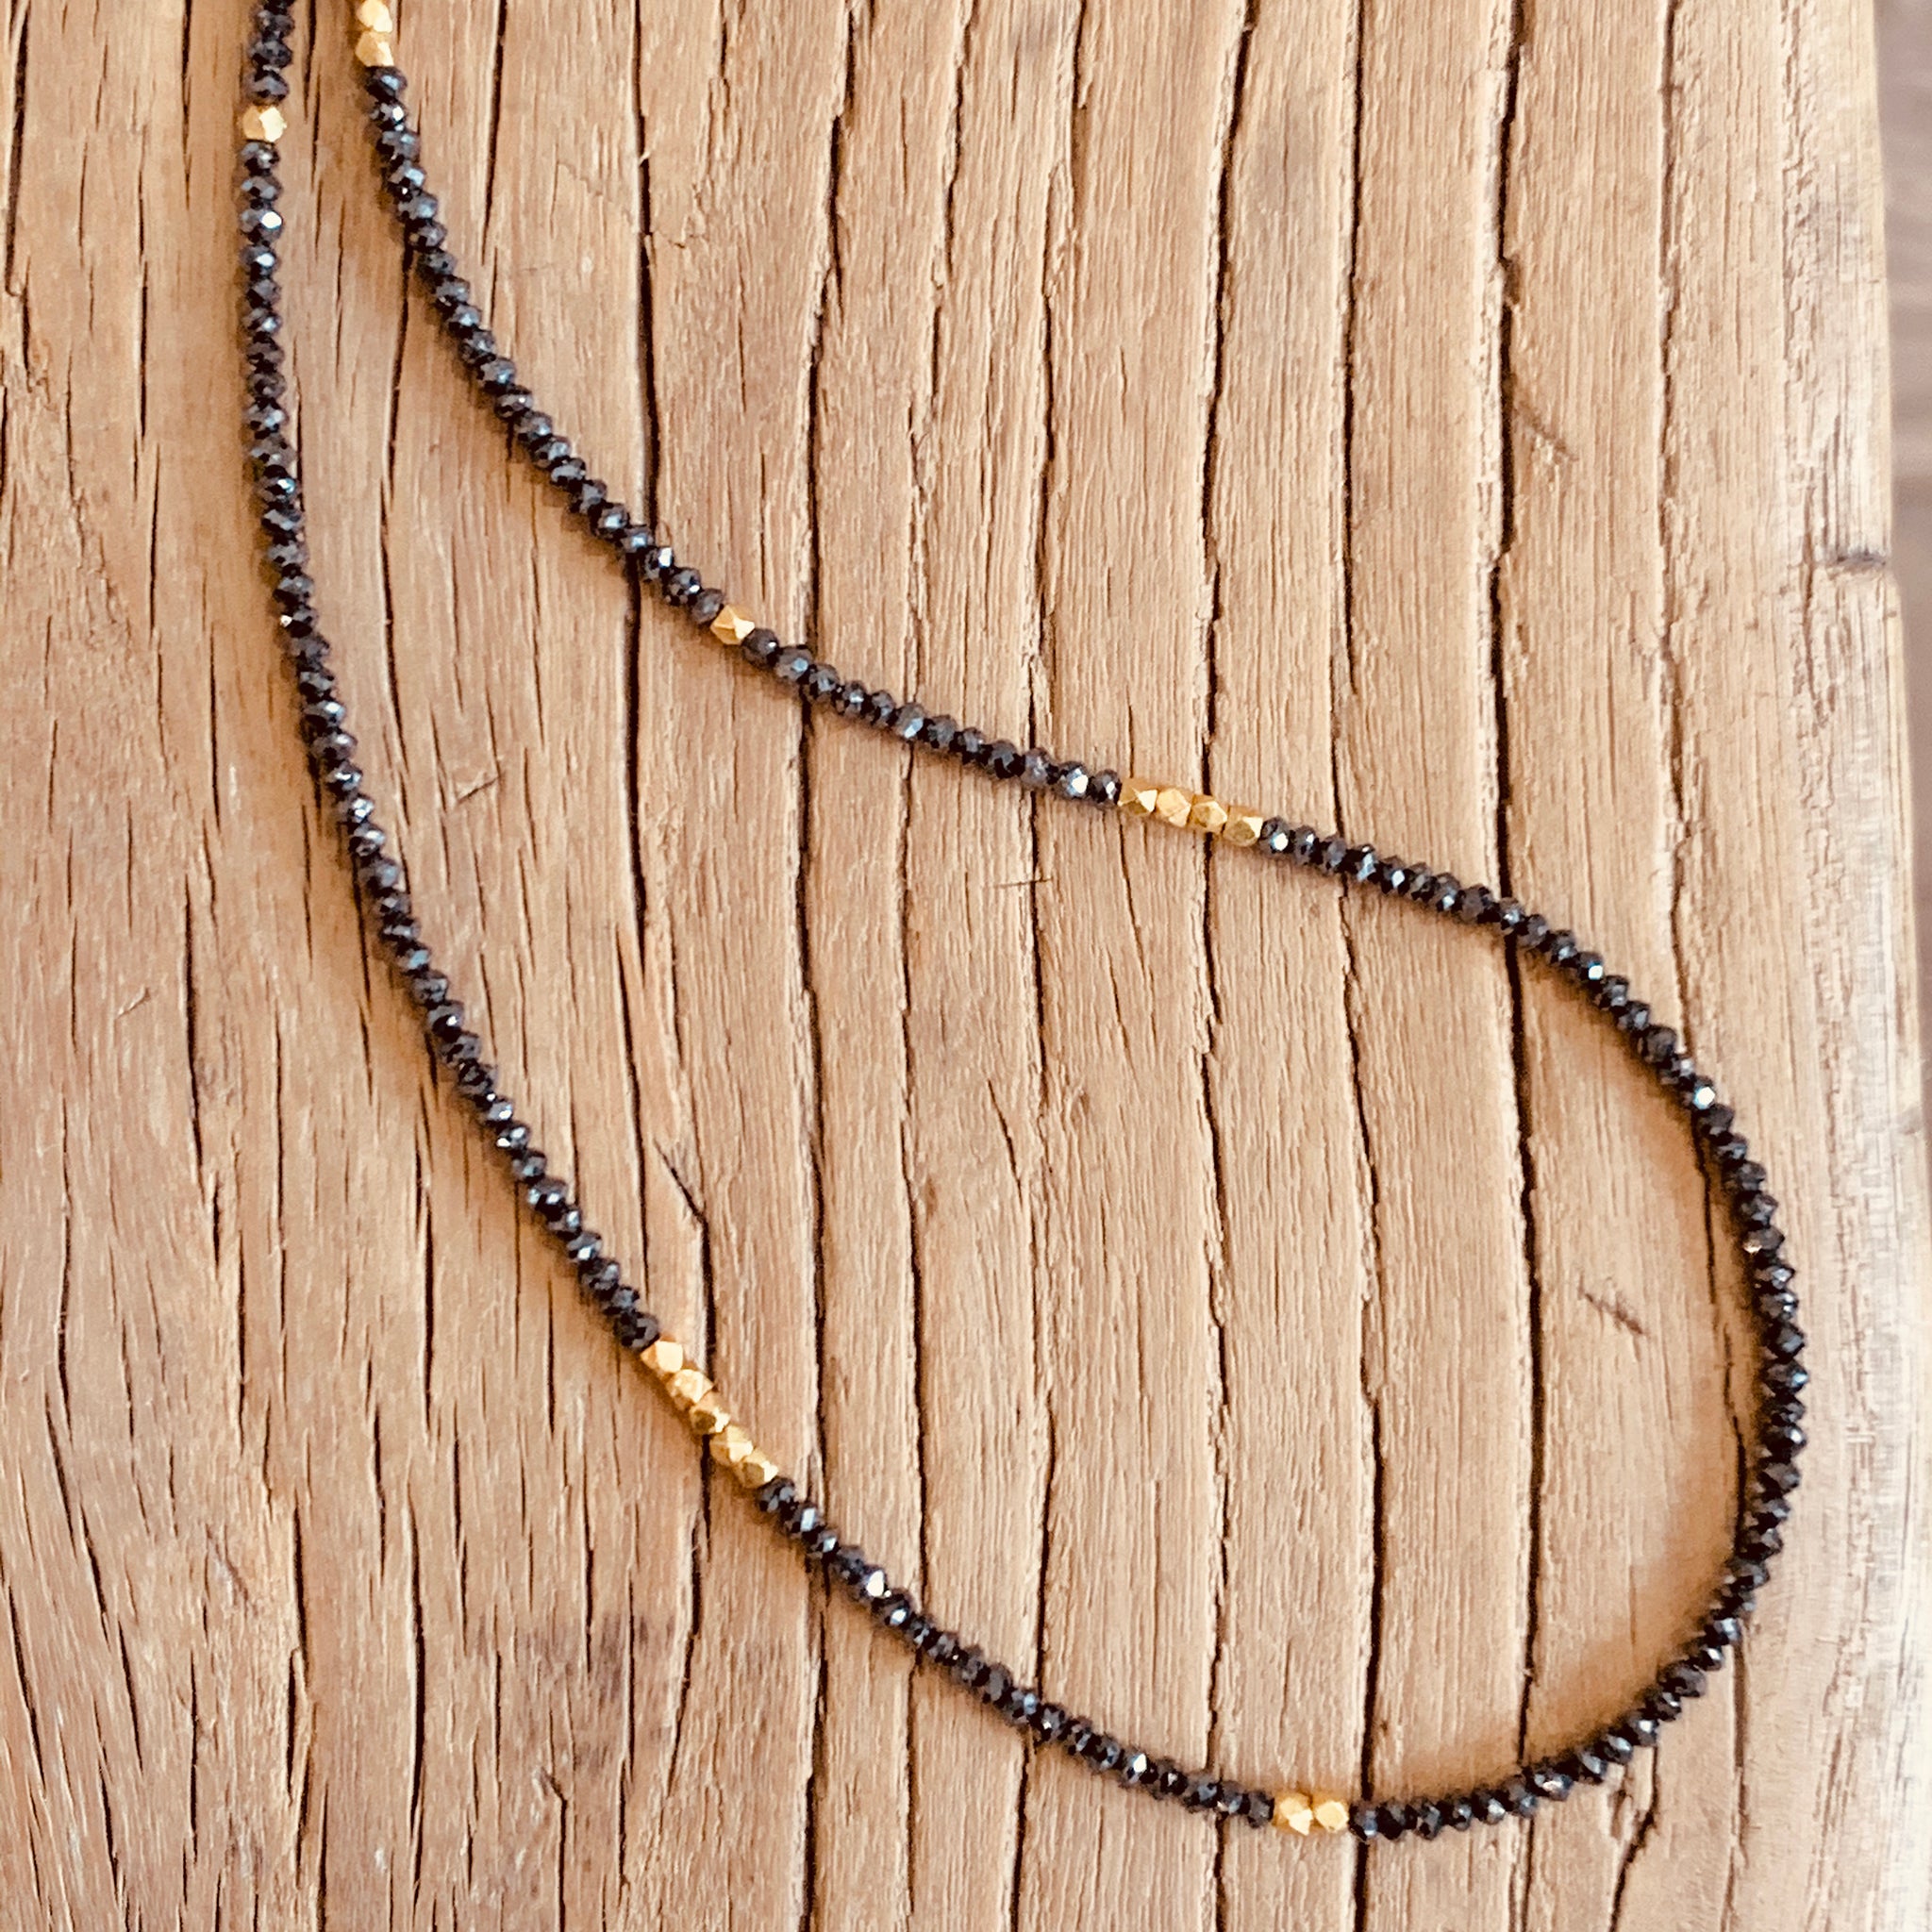 Black and Tan Beaded Gold Necklace